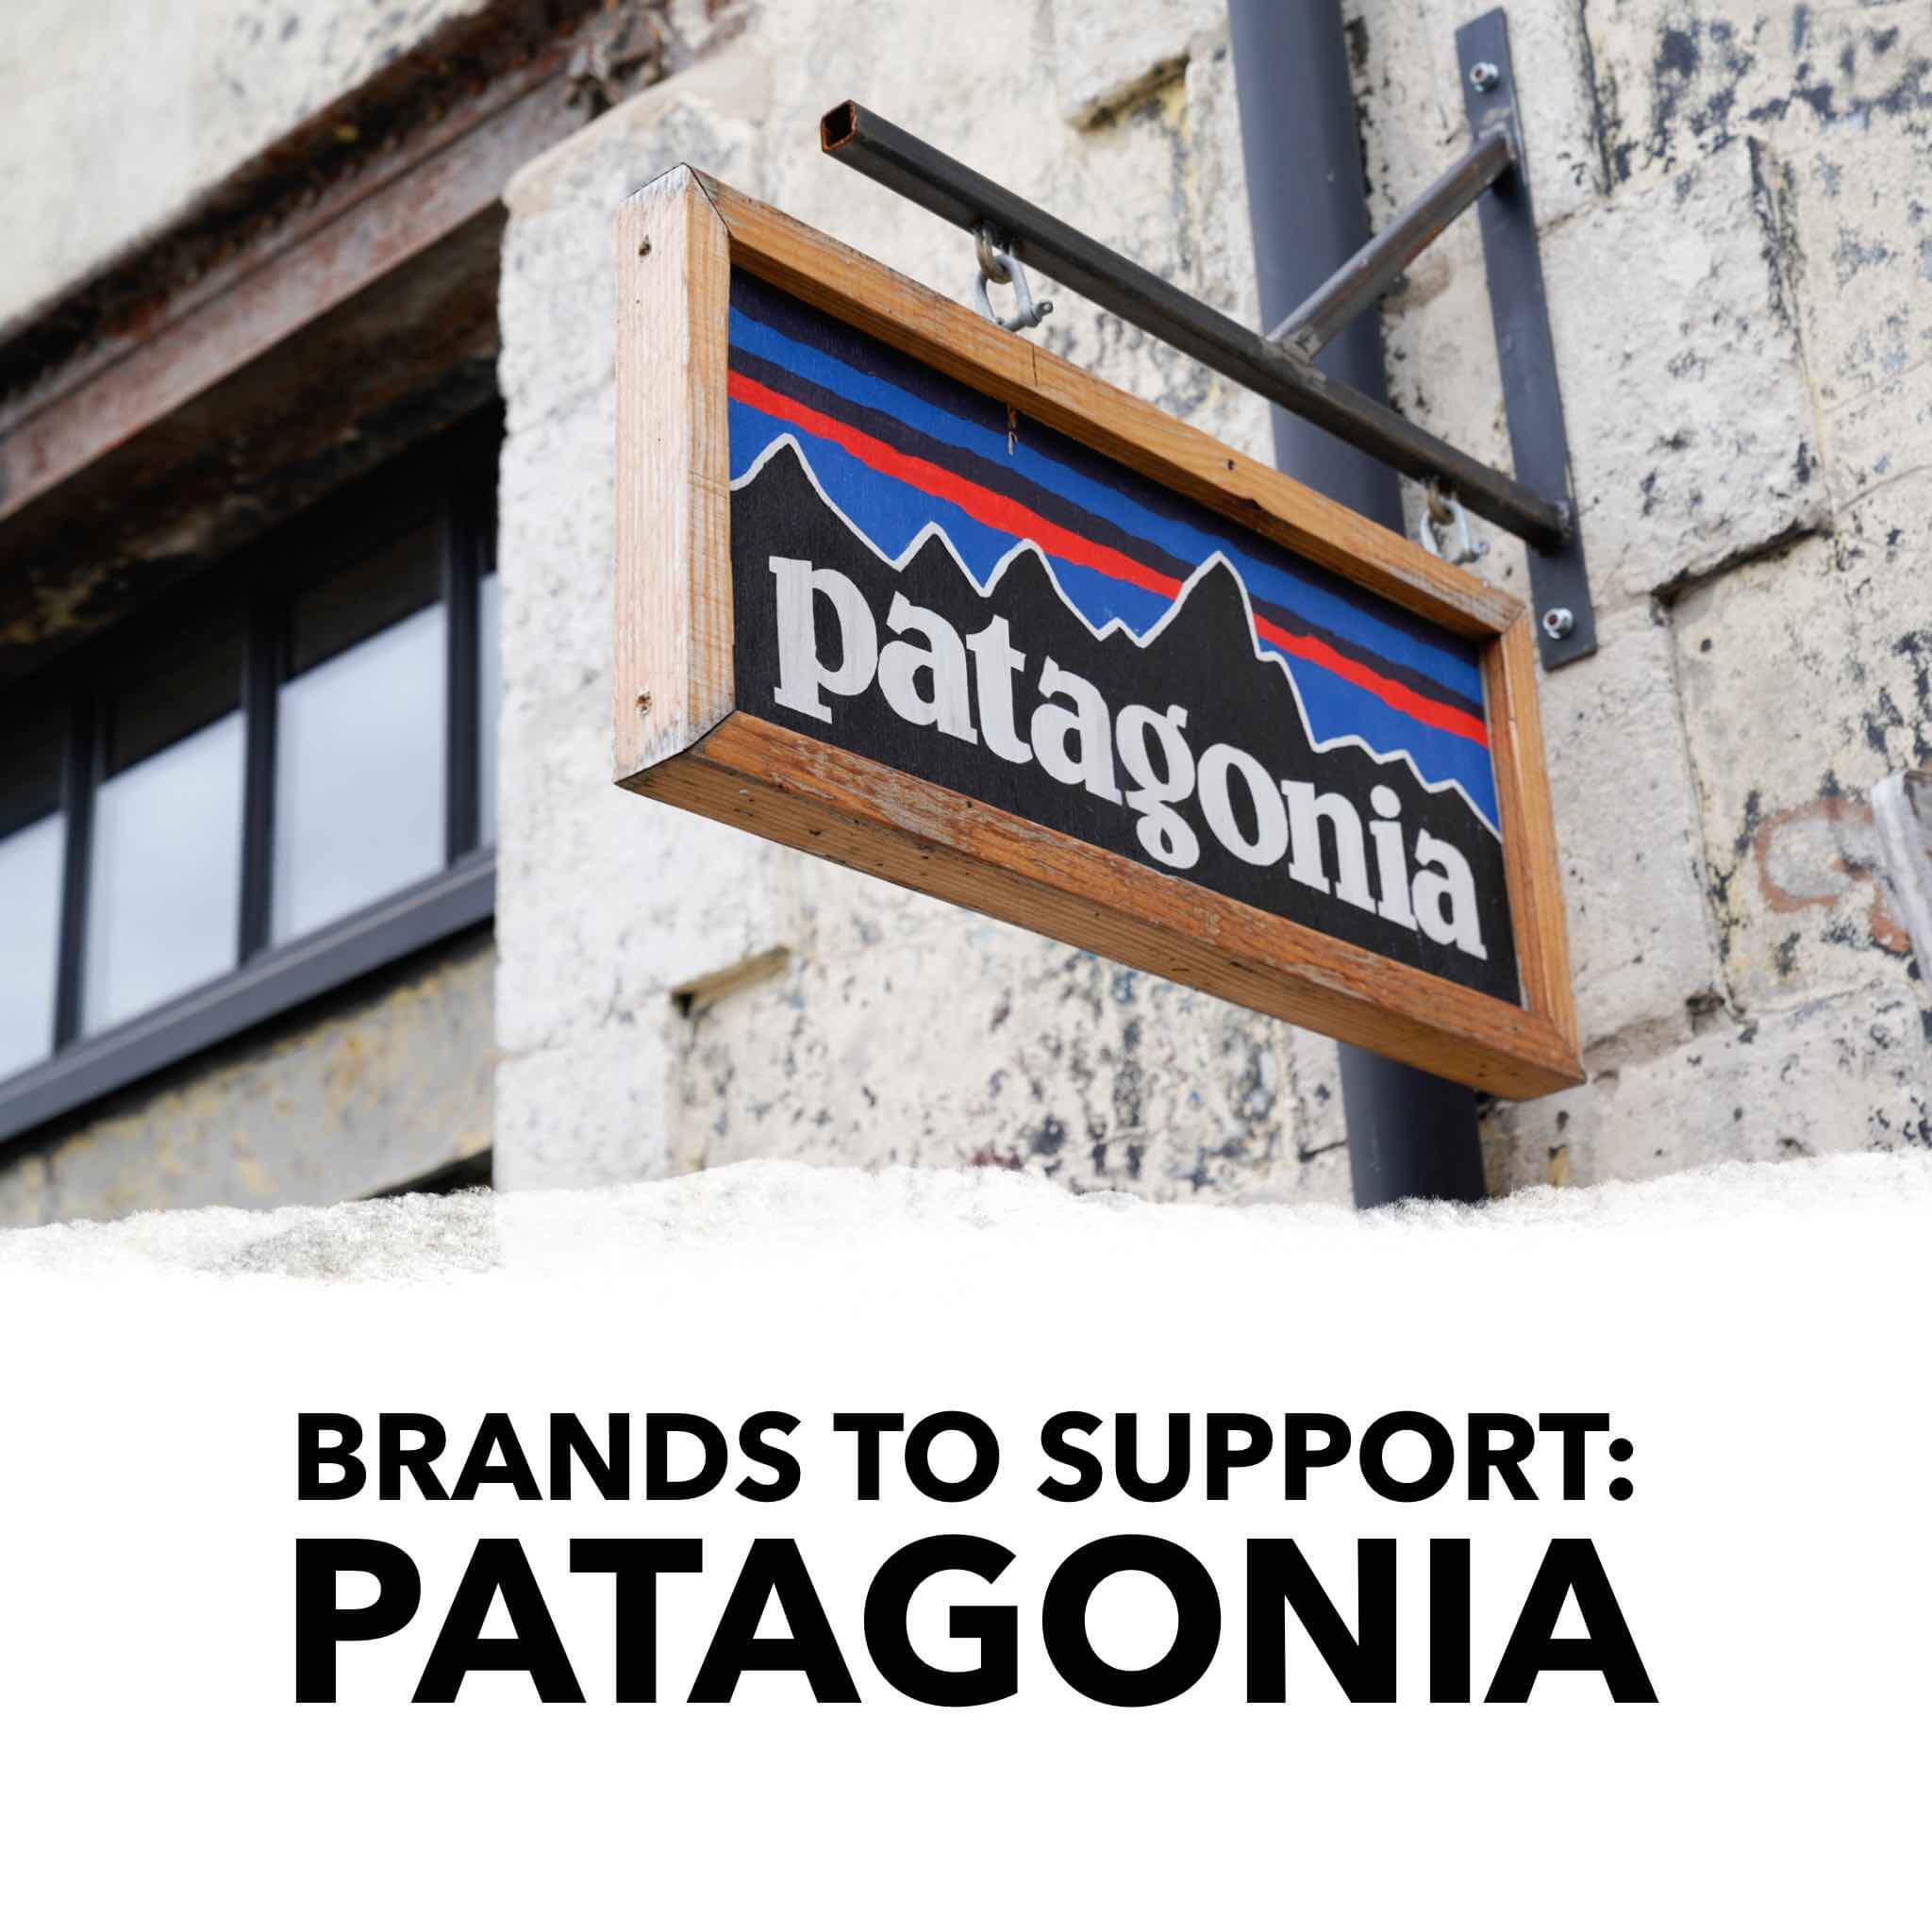 Brands to Support Patagonia